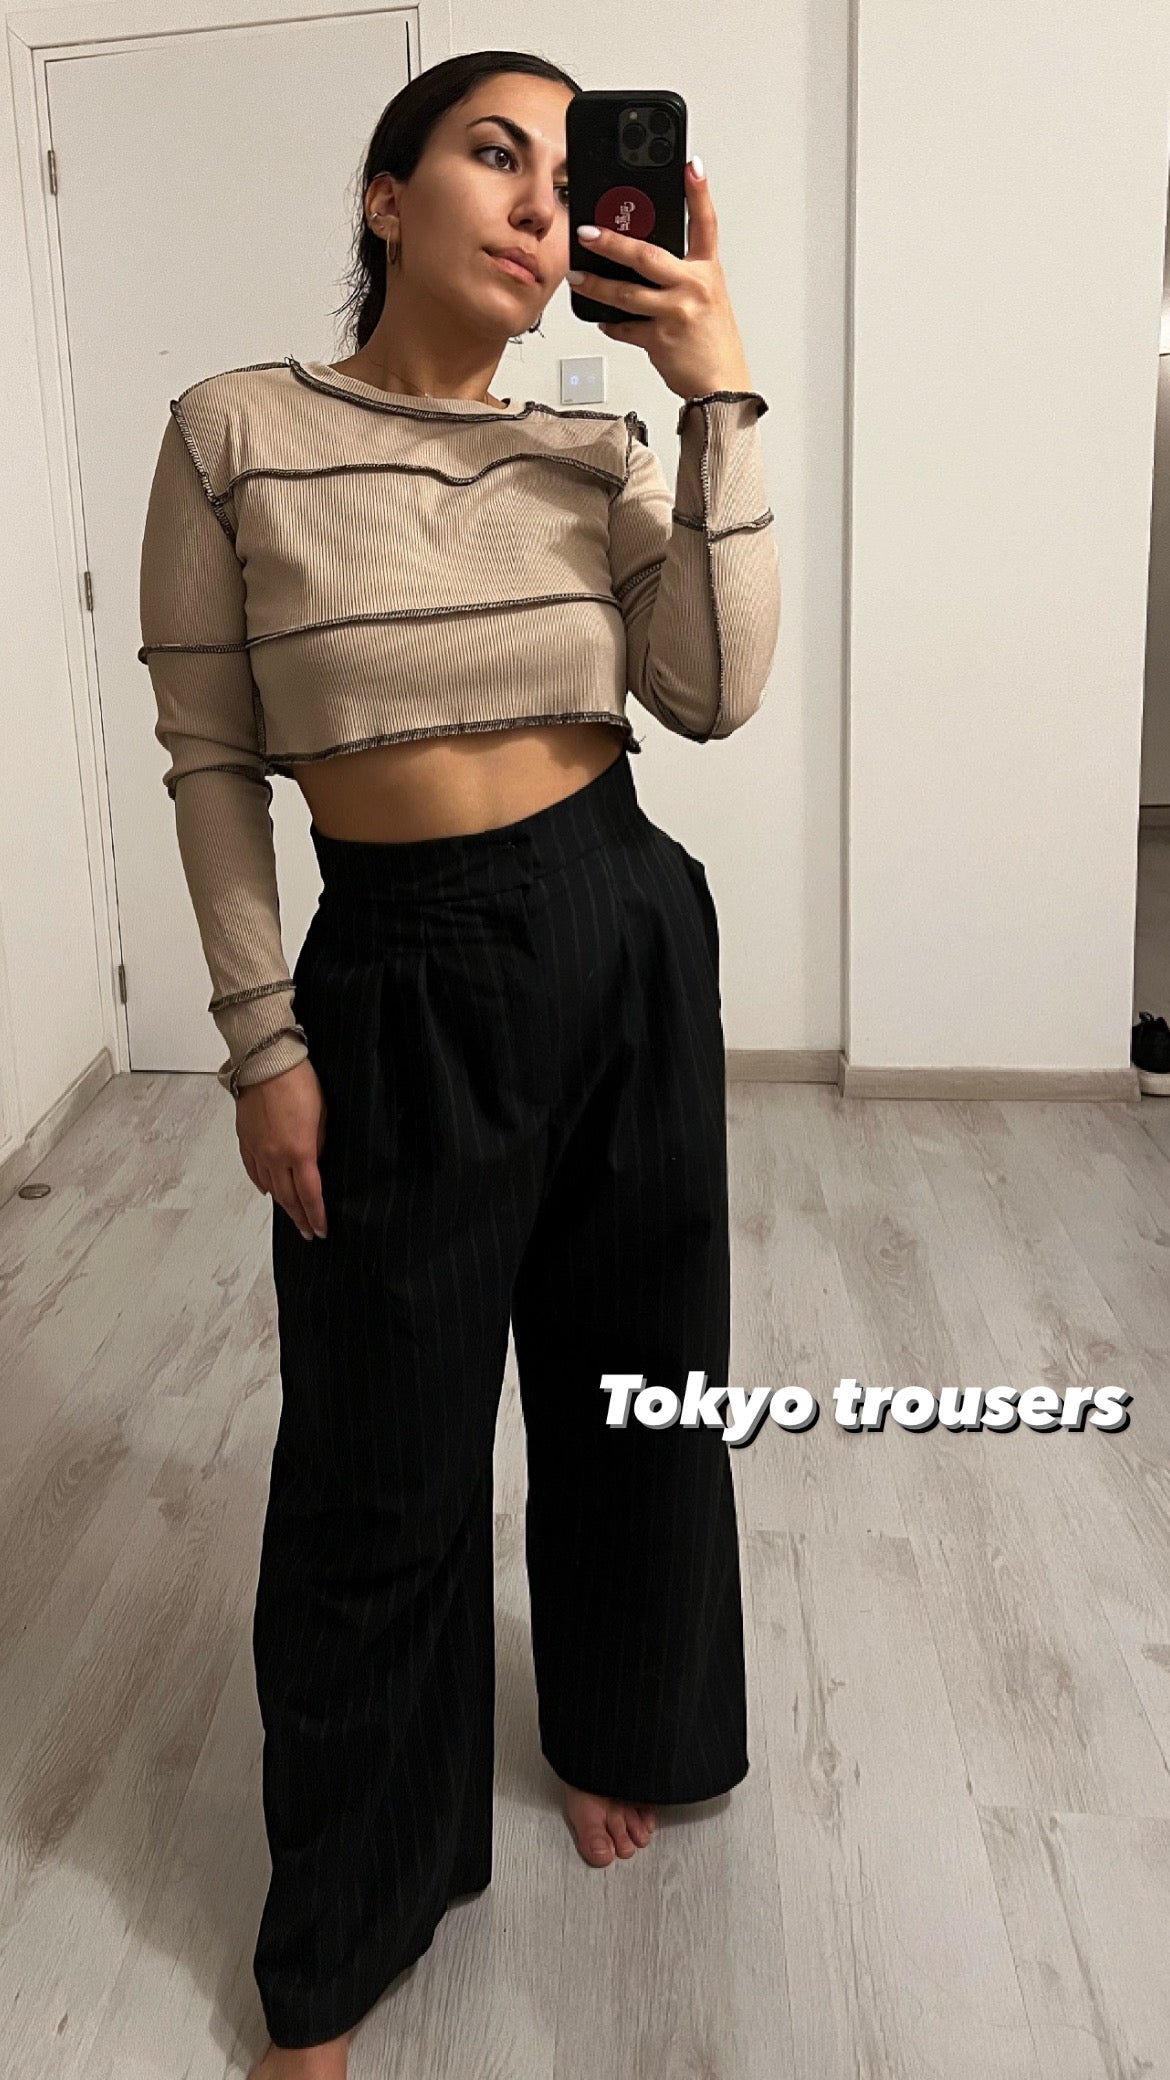 Tokyo trousers